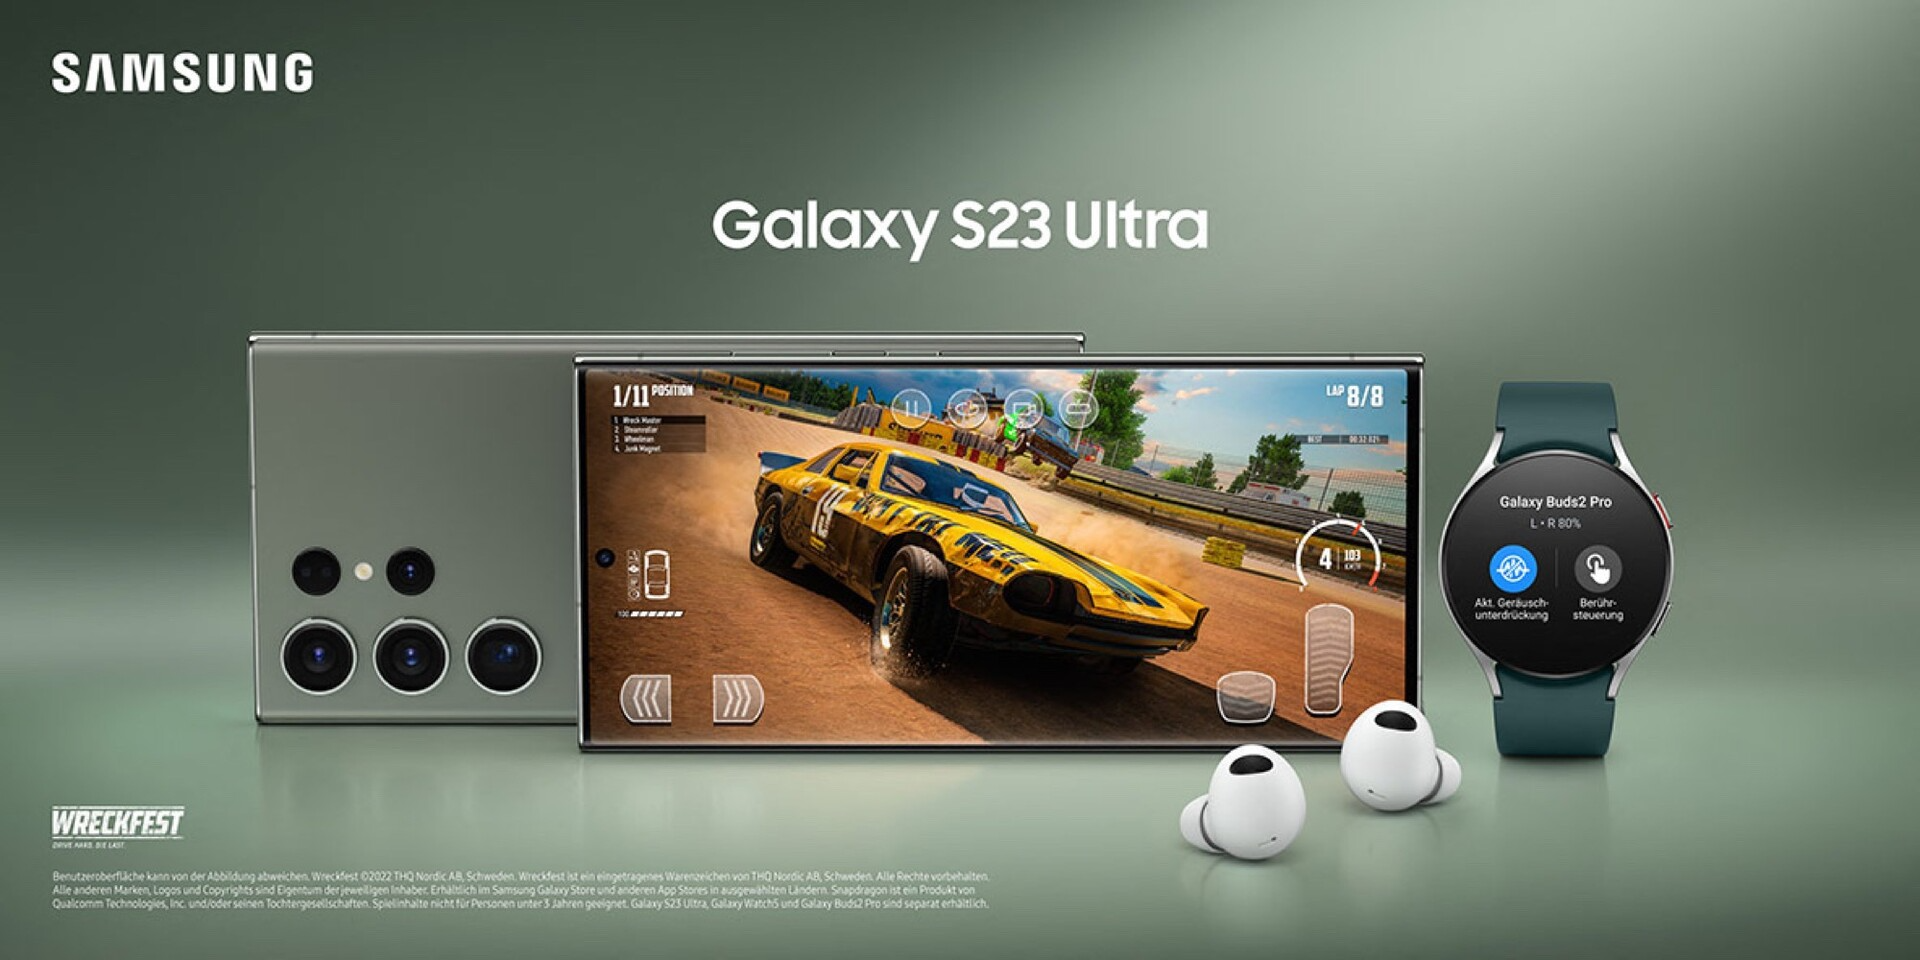 Samsung Galaxy S23 Ultra: 7 Reasons why you should be excited